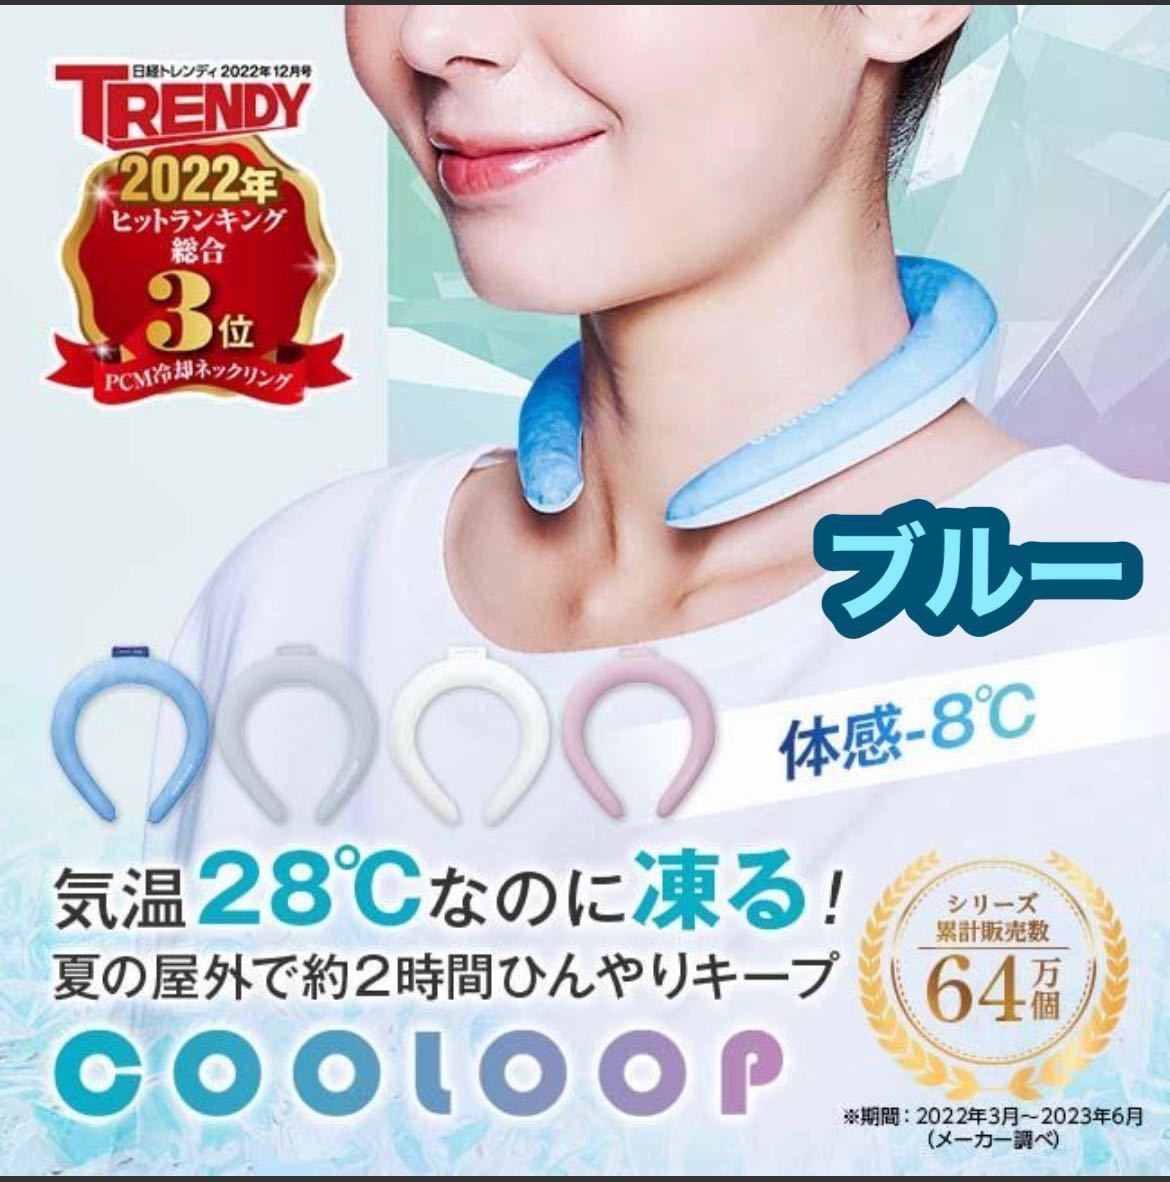 COOLOOP Koo loop neck ring blue ice neck ring raise of temperature height .. cold .. I sling cooling goods cool neck cooling agent kojito